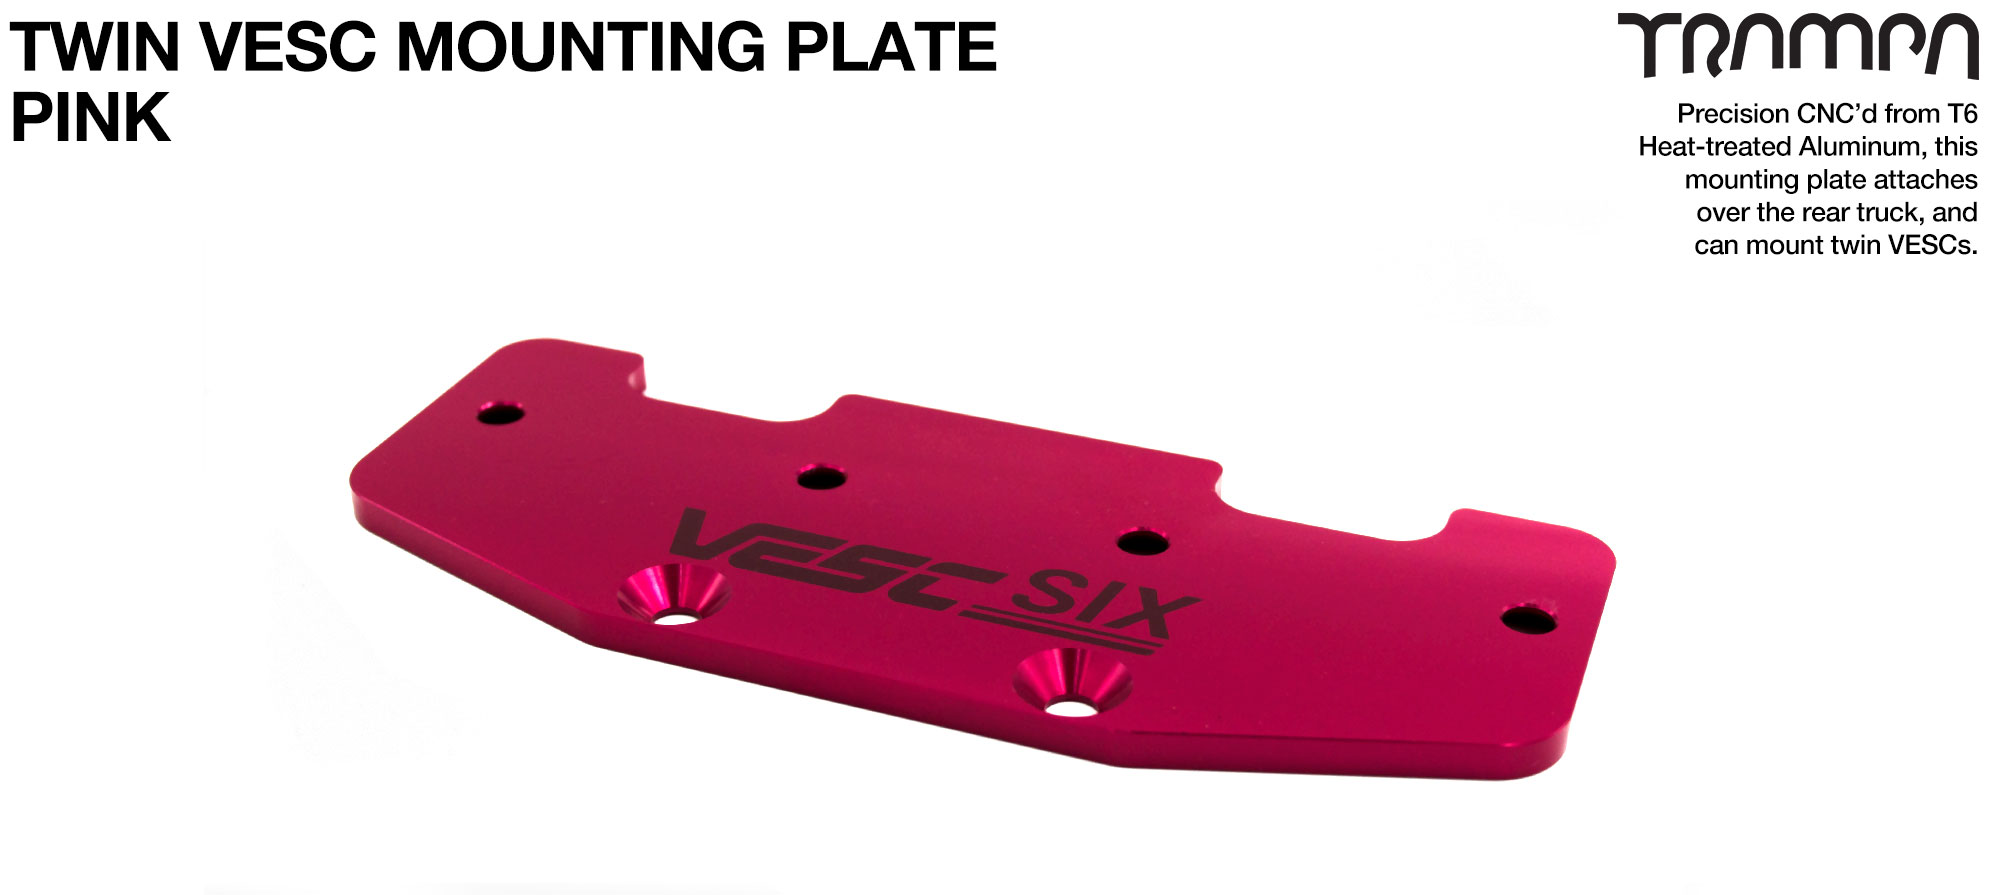 ALUMINIUM mounting Plate for TWIN VESC 6 - Anodised PINK 